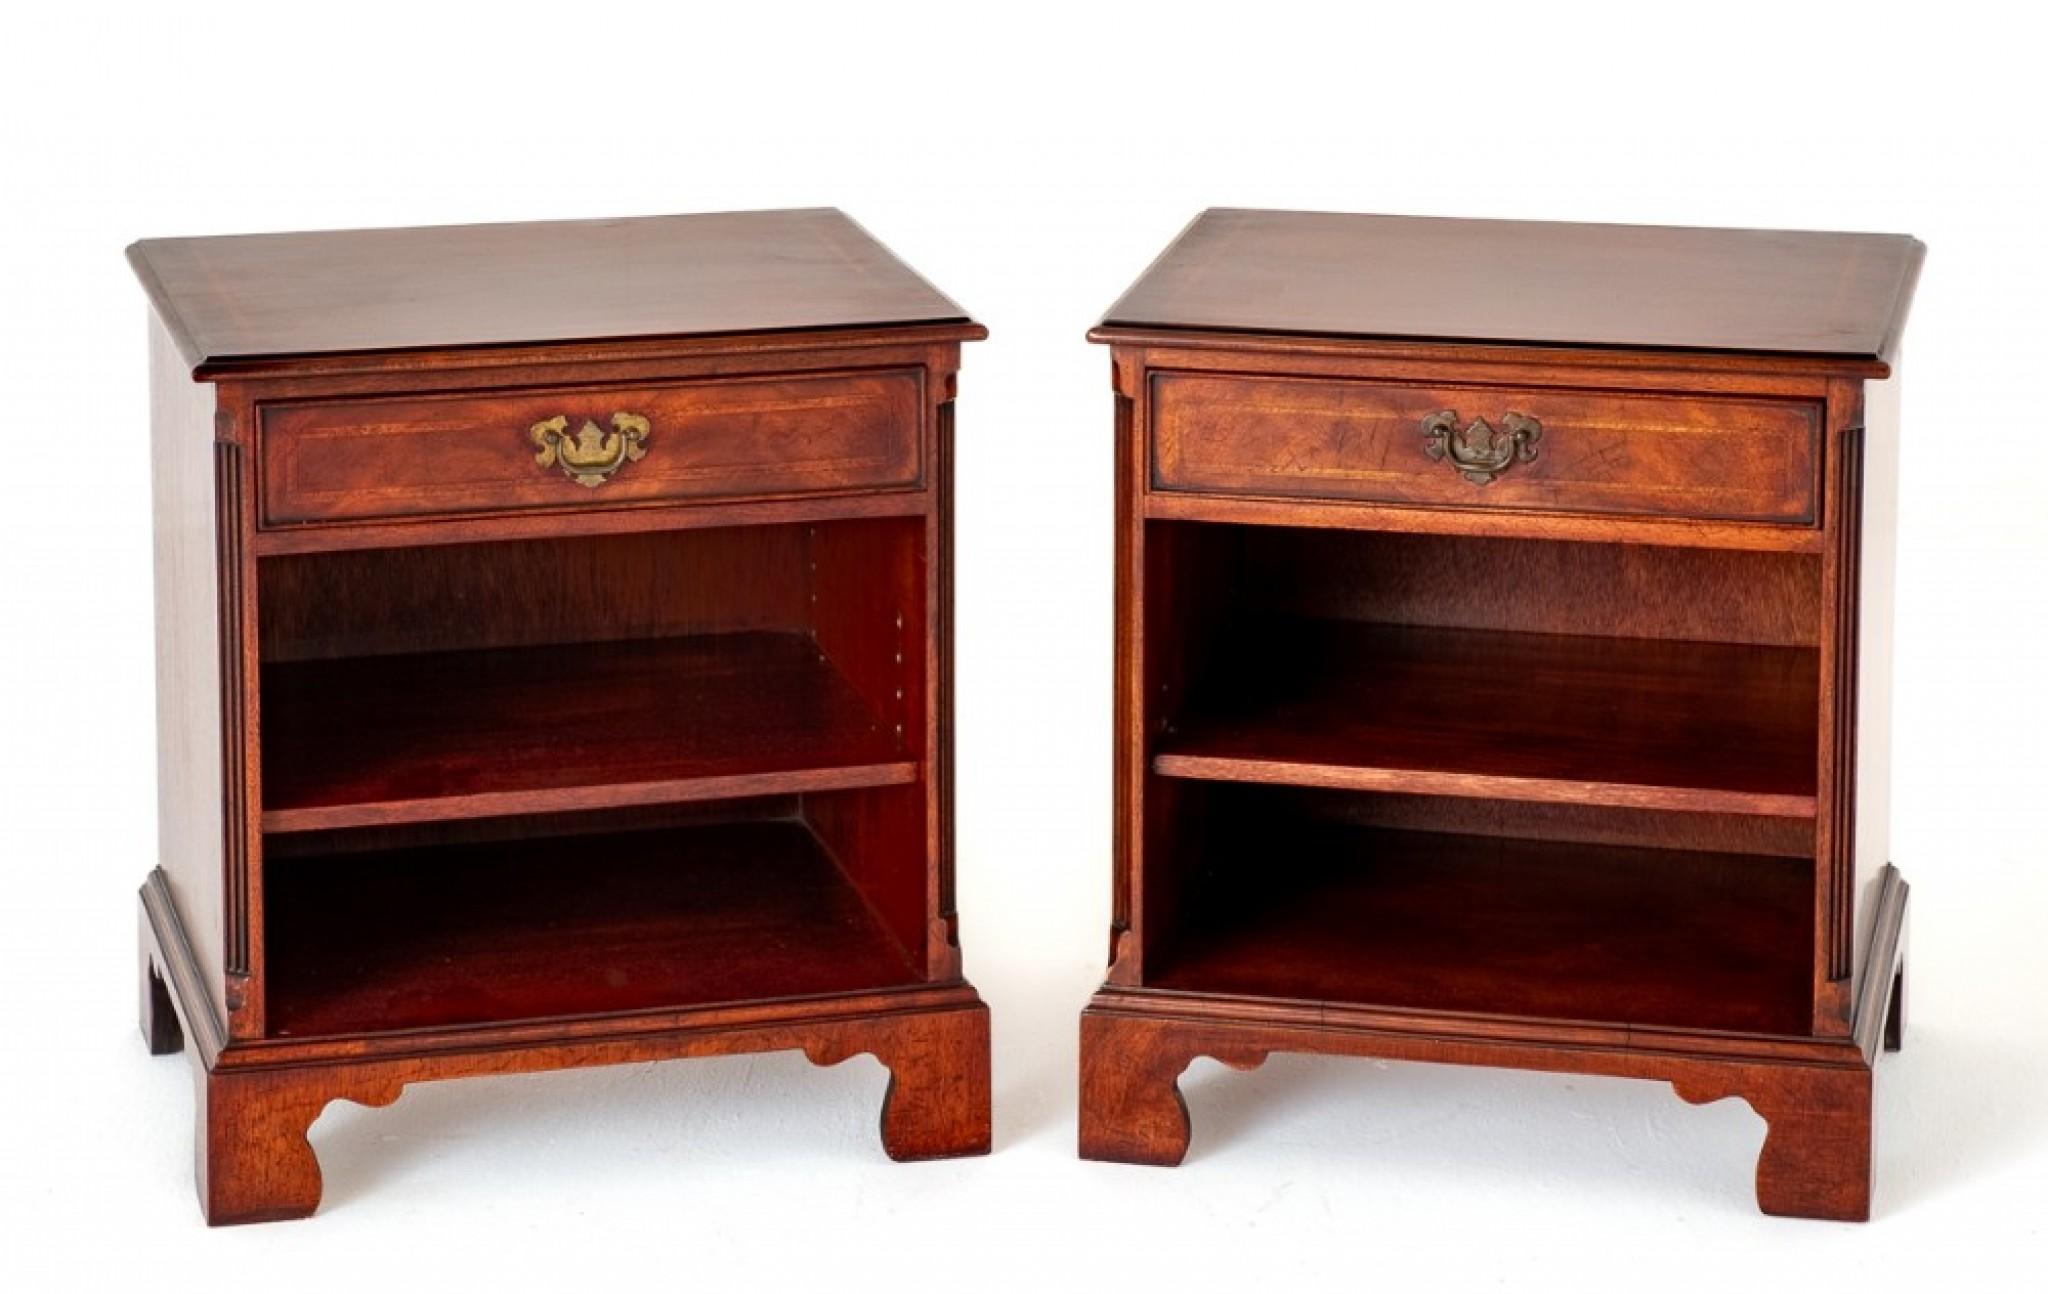 Pair of Mahogany Georgian Revival Bedside Cabinets.
These Bedside Cabinets Stand upon Bracket Feet.
Circa 1920
Both Cabinets Feature 1 x Adjustable Shelf.
The Oak Lined Drawers Having Herringbone and Boxwood Line Inlays.
The Tops of the Cabinets